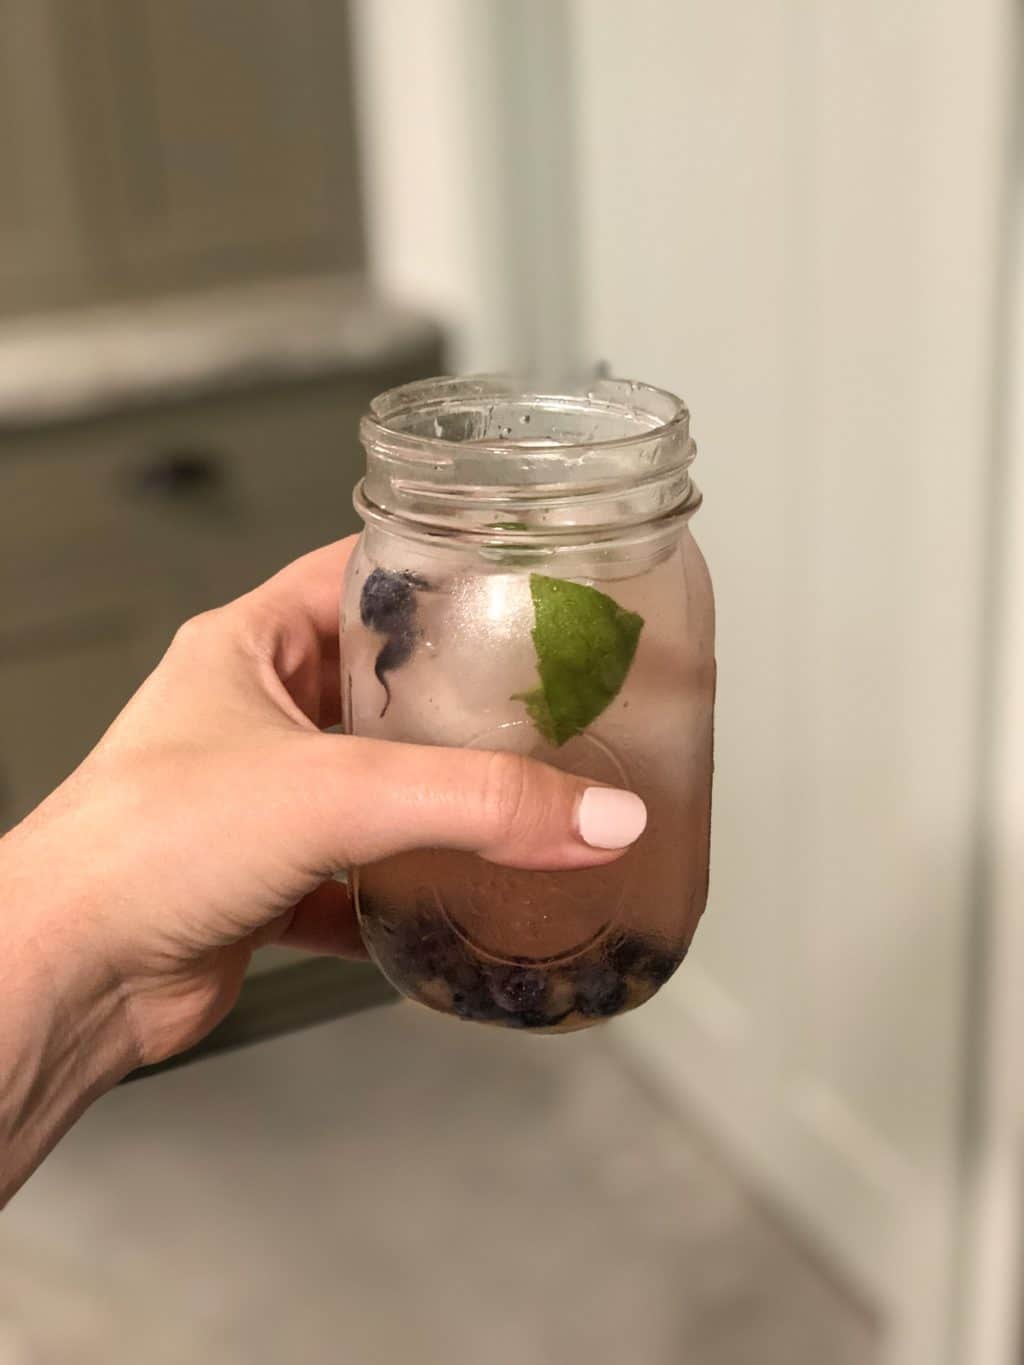 hand holding blueberry basil cocktail